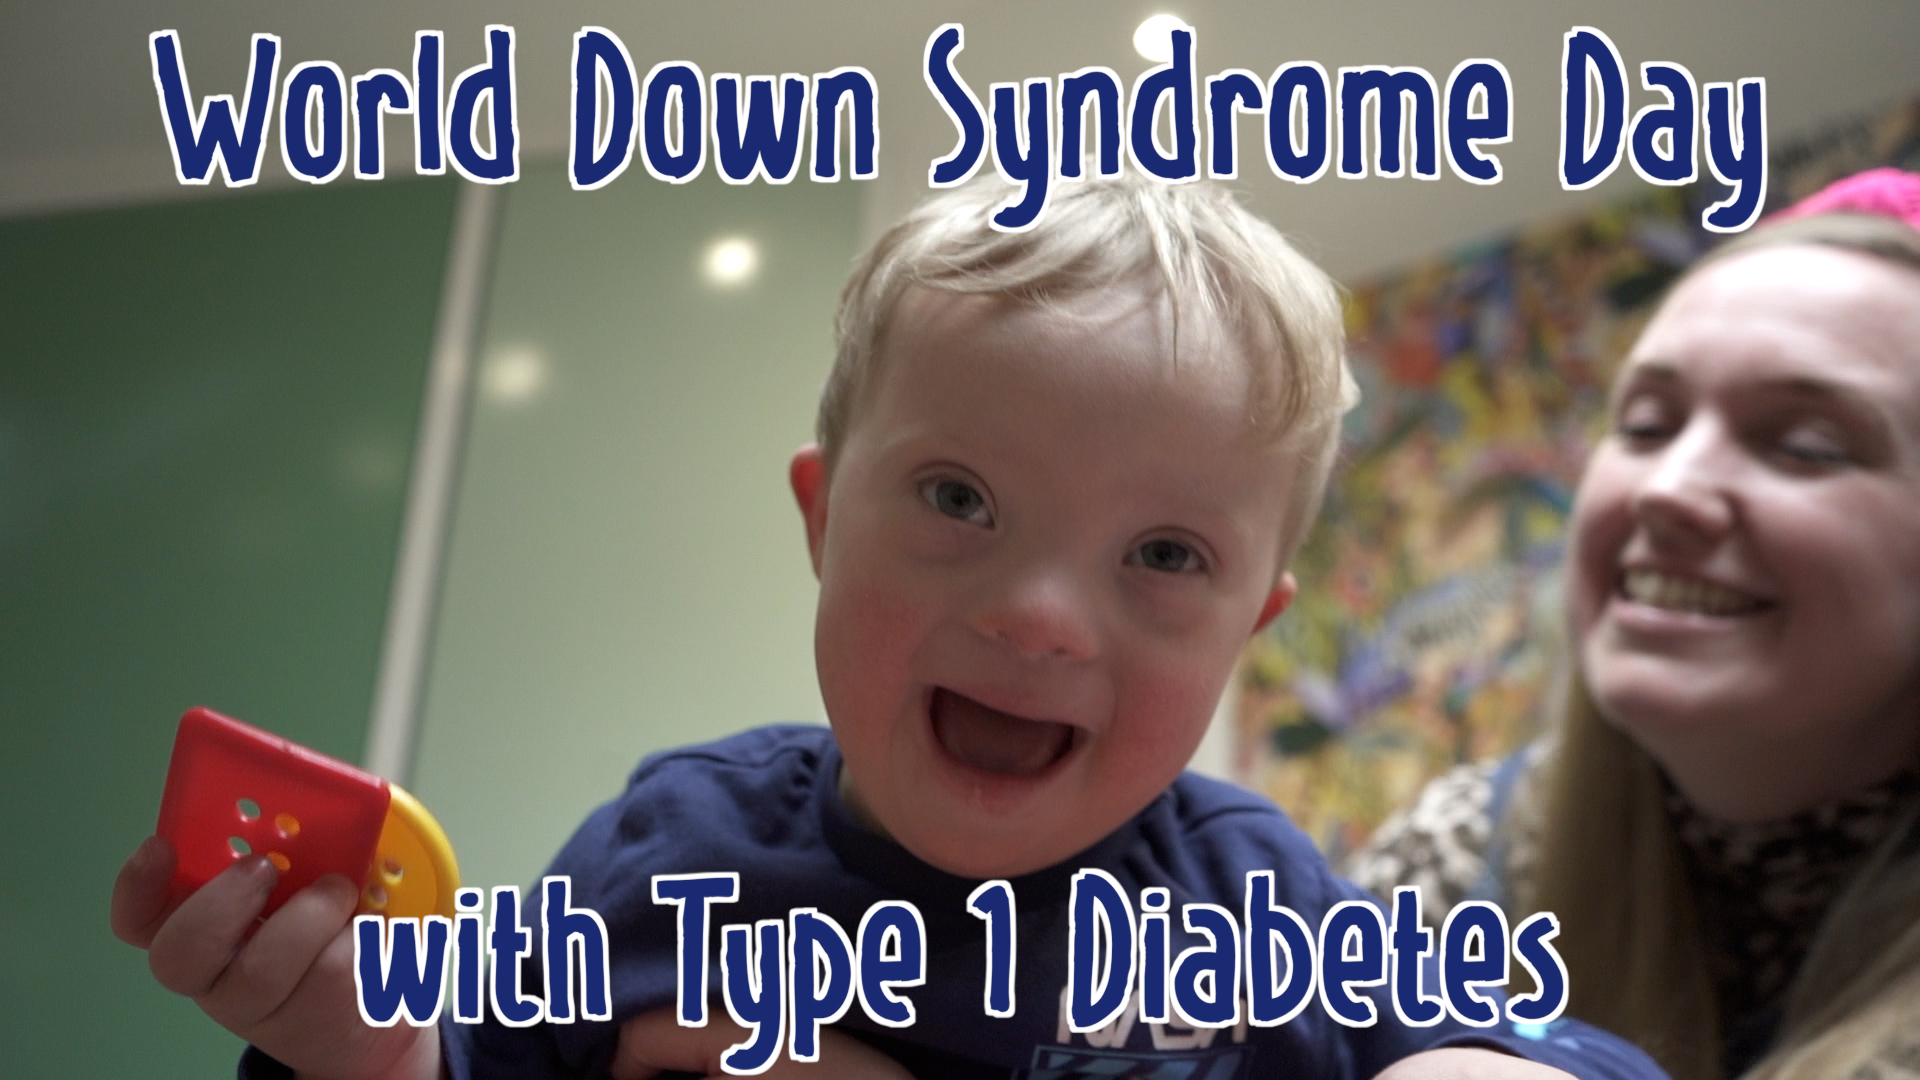 New Film for World Down Syndrome Day.